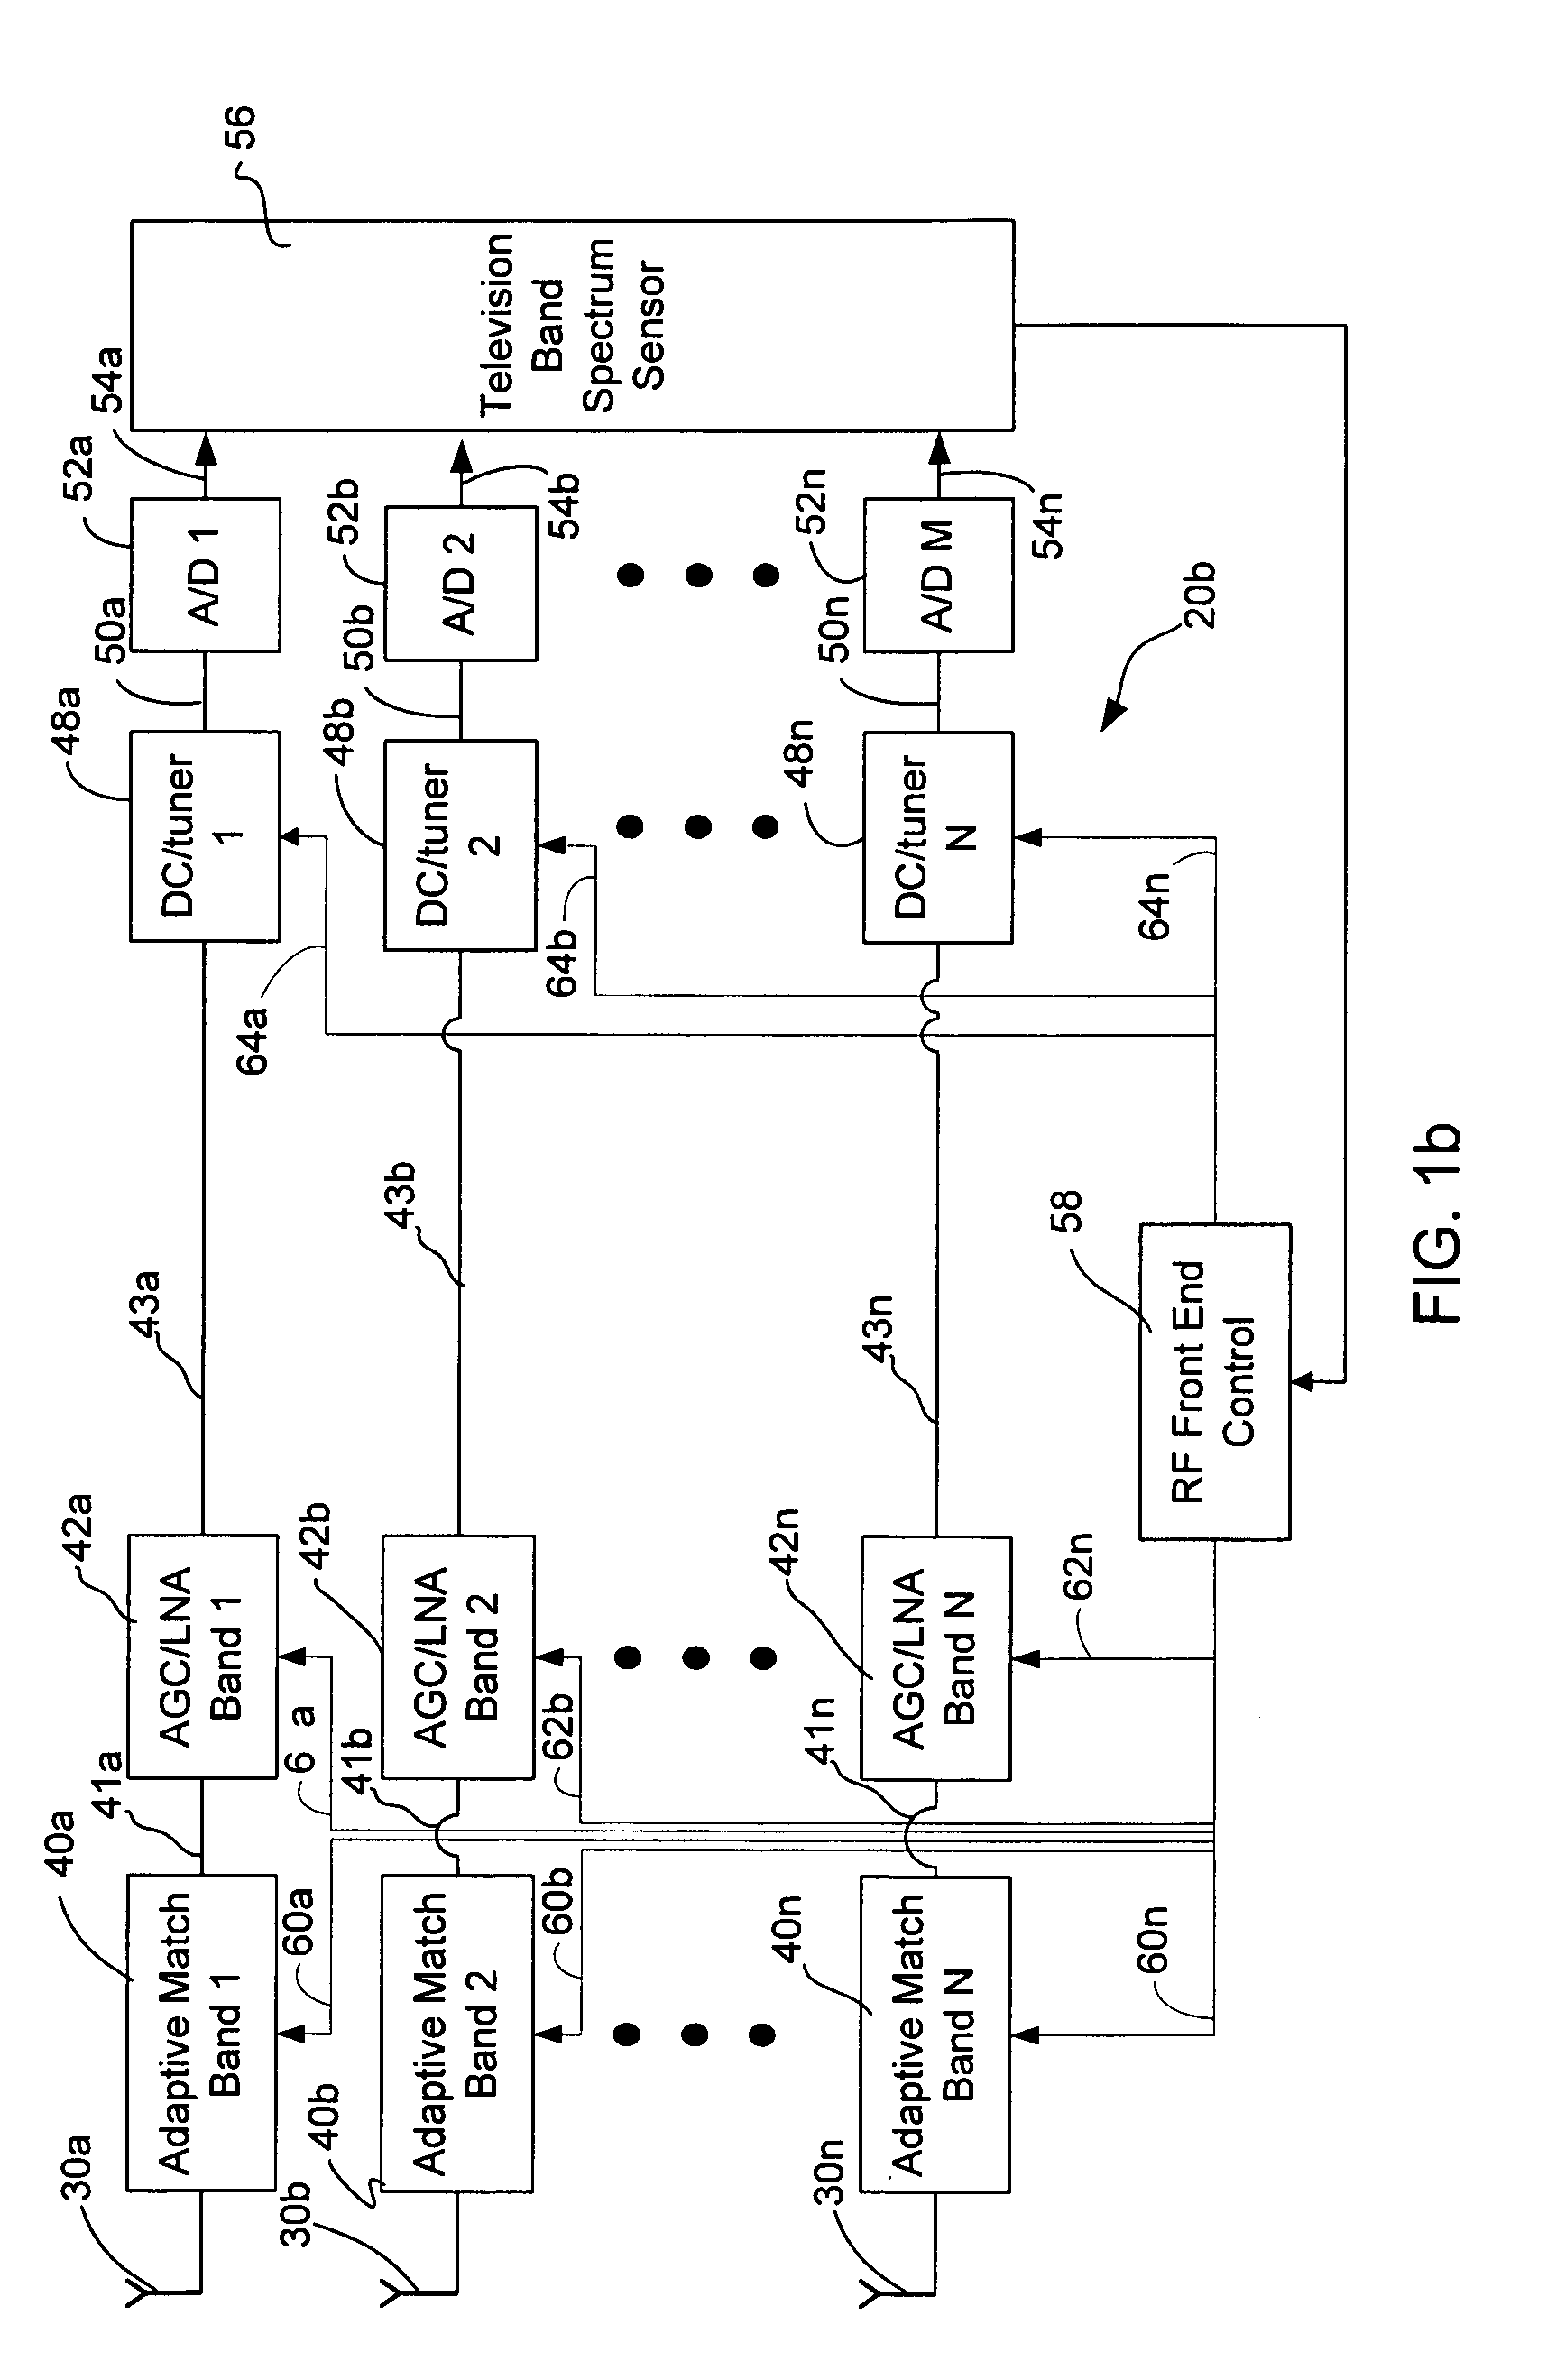 Radio frequency front end for television band receiver and spectrum sensor